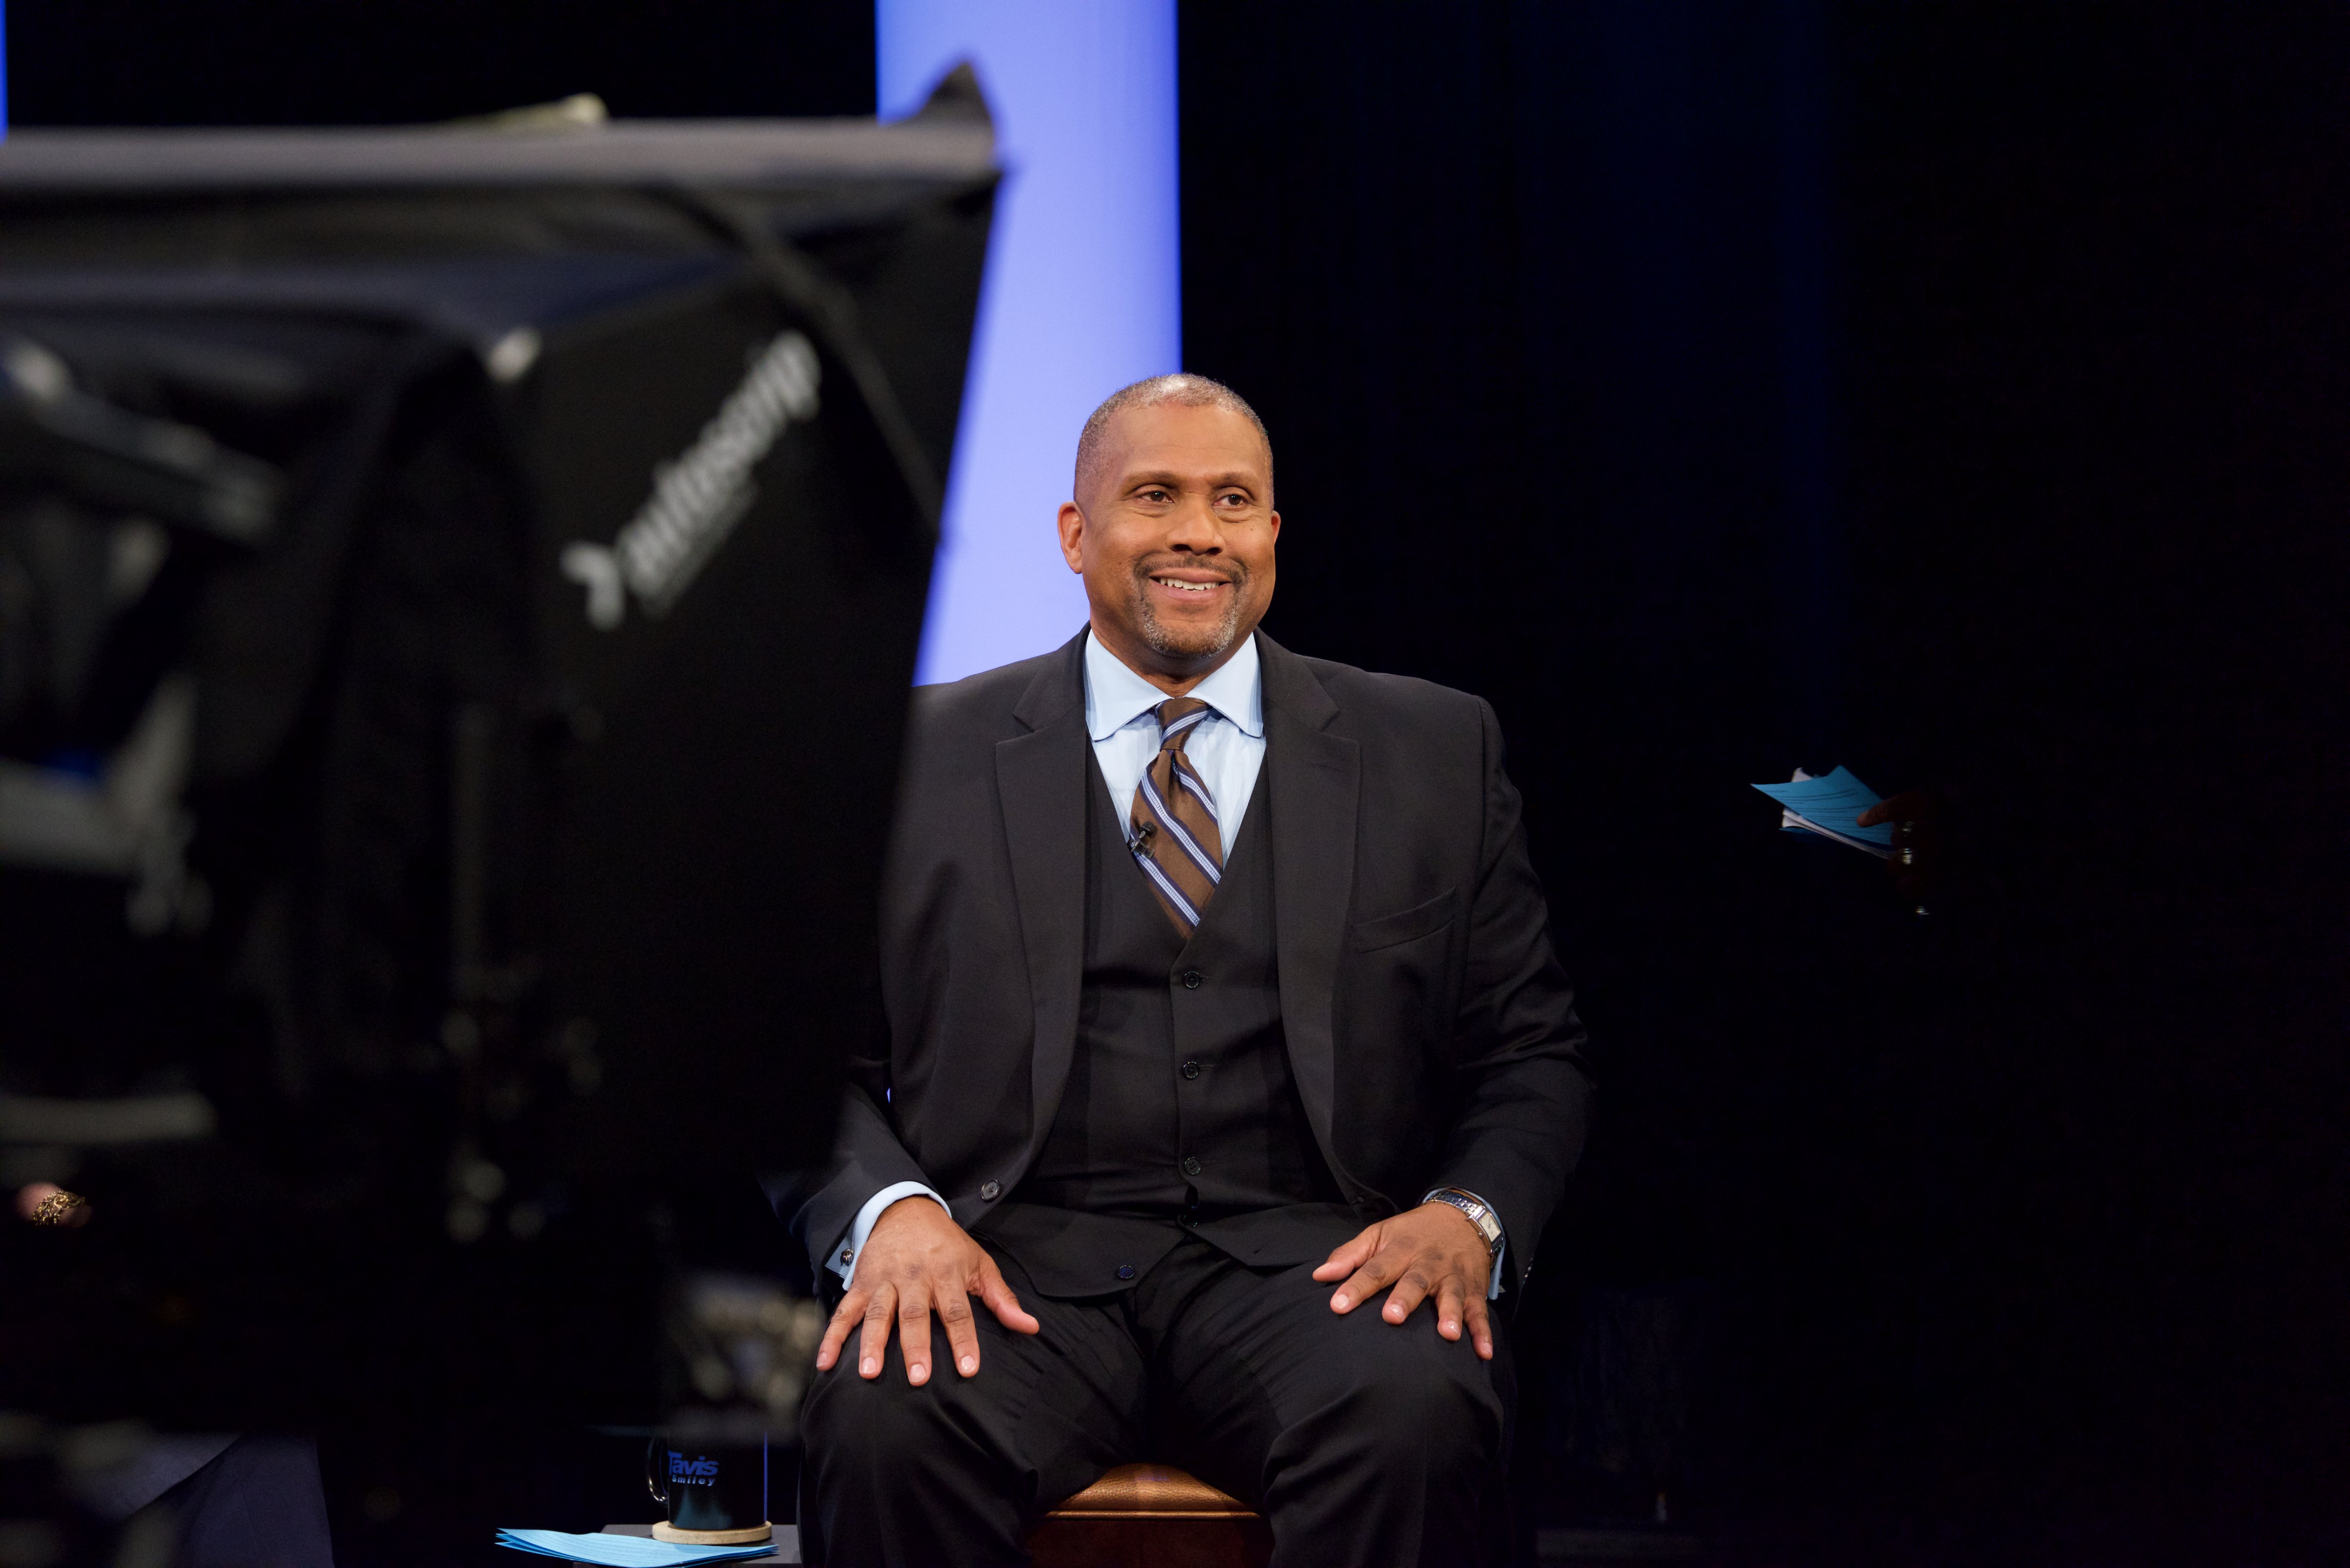 Broadcaster/Producer Tavis Smiley serves as host and moderator on Courting Justice With Tavis Smiley on December 8, 2016 in Cleveland, Ohio. (Earl Gibson III&mdash;Getty Images)